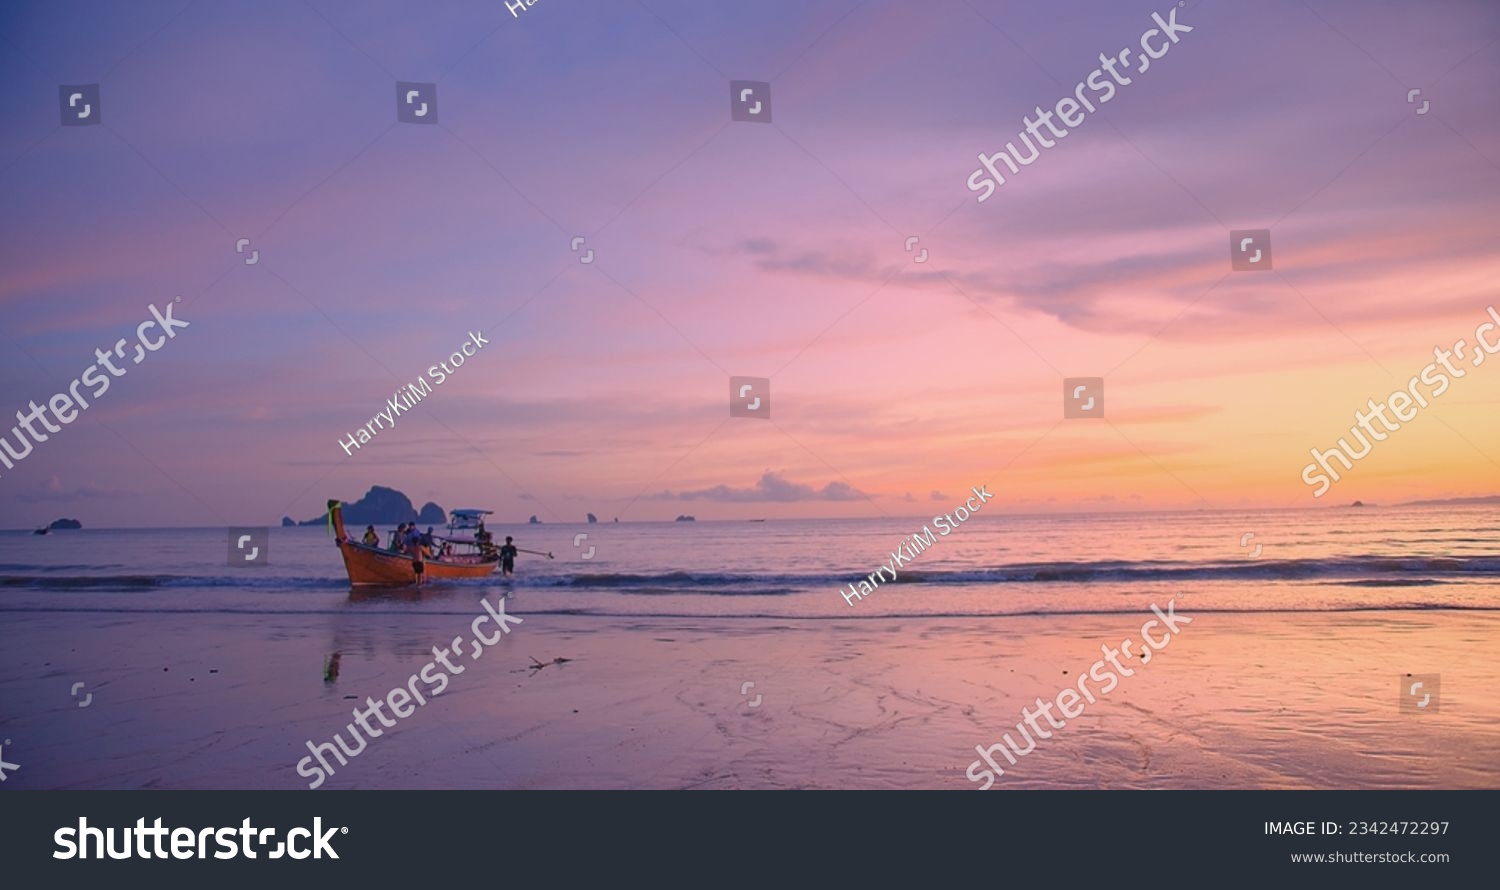 Beautiful amazing sunset over tropical ocean Andaman sea beach with colorful sky and Long tail boats in summer at Ao Nang, Krabi, Thailand, tourism vacation holiday travel trip destination concept #2342472297